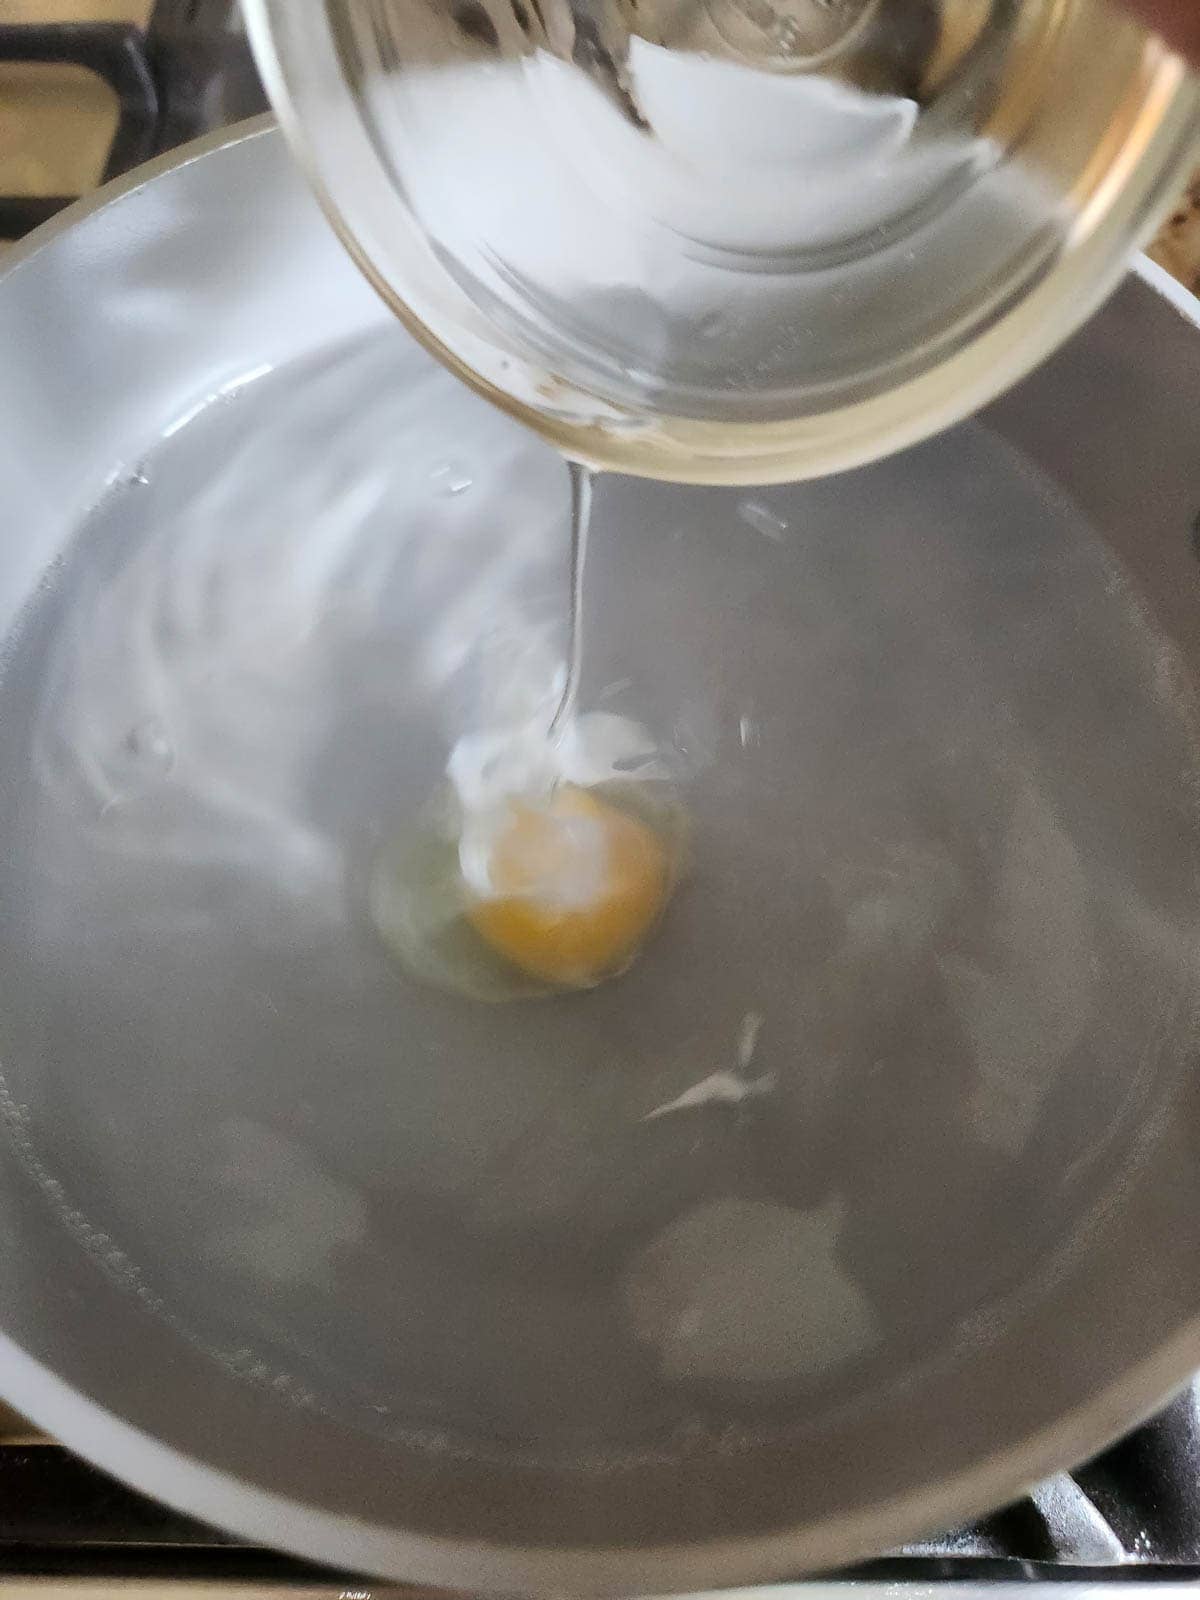 Egg dropped in boiling water for poached eggs.